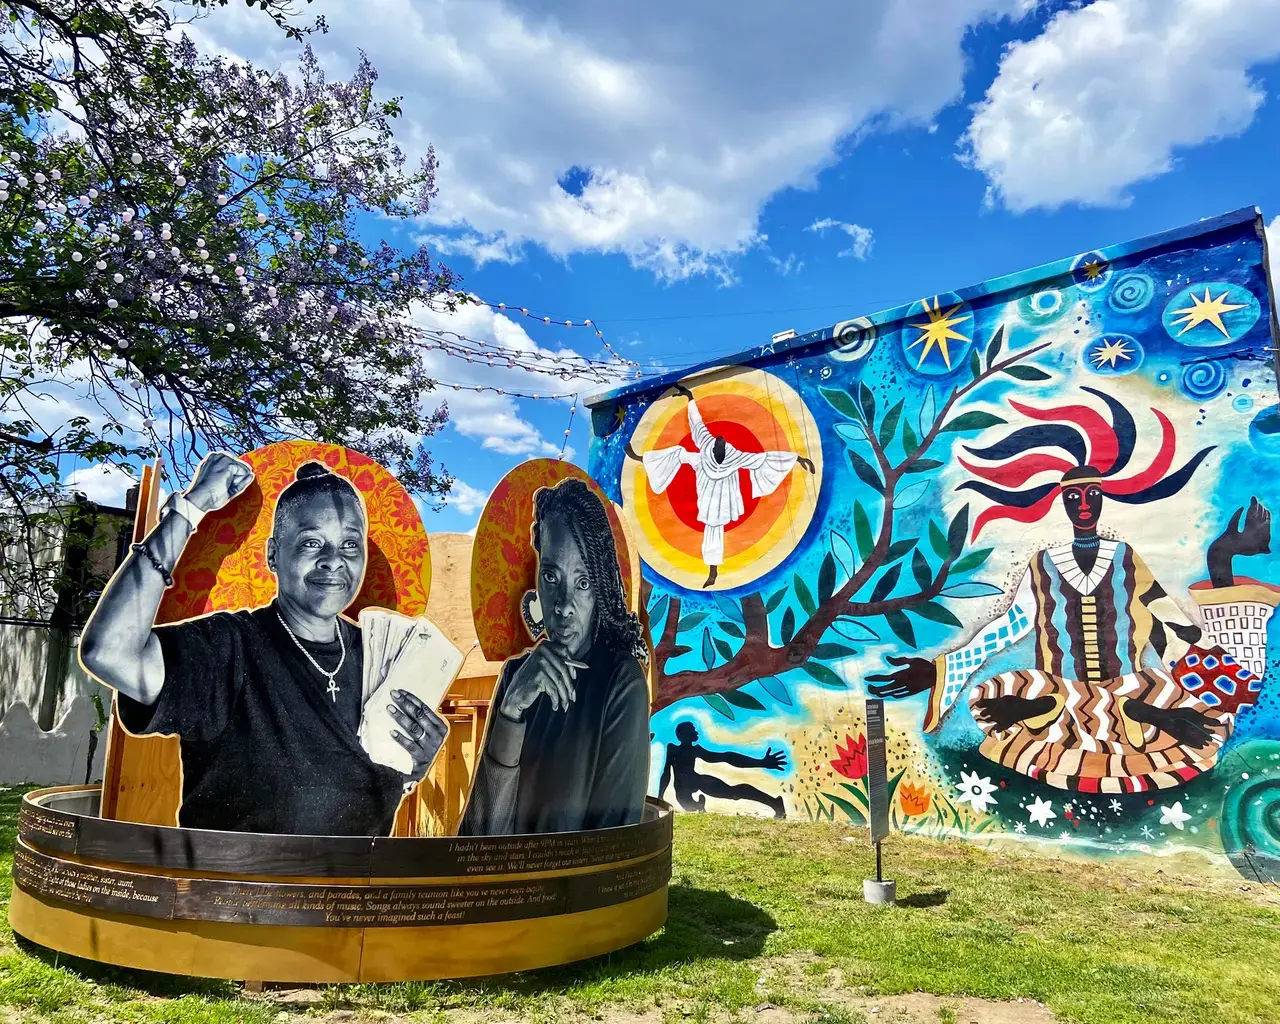 Sculpture: Courtney Bowles and Mark Strandquist, On the Day They Come Home, 2021, part of Staying Power exhibition, The Village of Arts and Humanities, Fairhill-Hartranft neighborhood, Philadelphia, Pennsylvania. Mural: Lily Yeh, Obatala, 2018. Photo courtesy of The Pew Center for Arts &amp; Heritage.